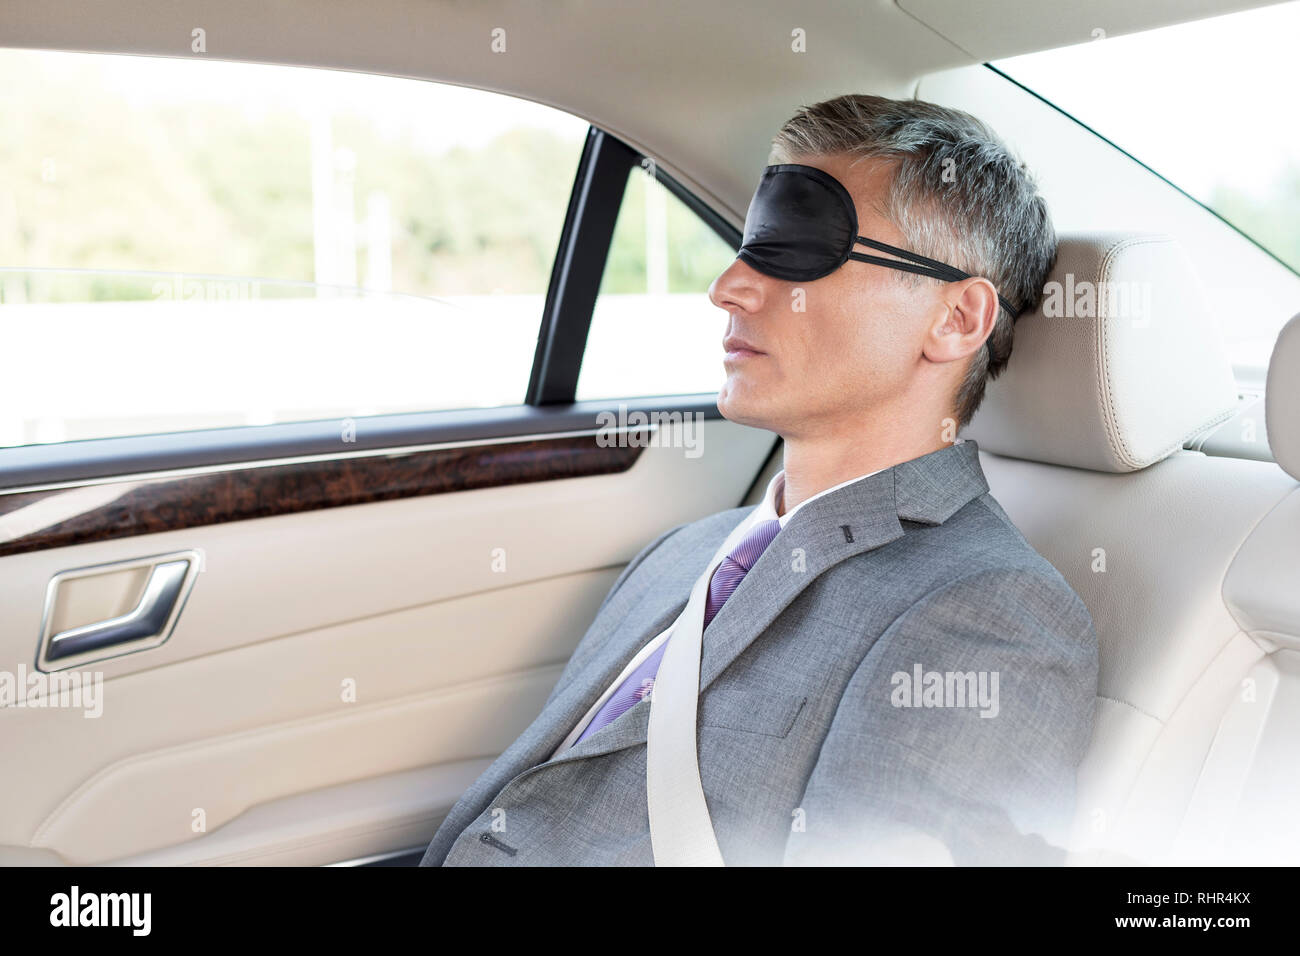 Mature businessman napping while wearing eye mask in car Stock Photo